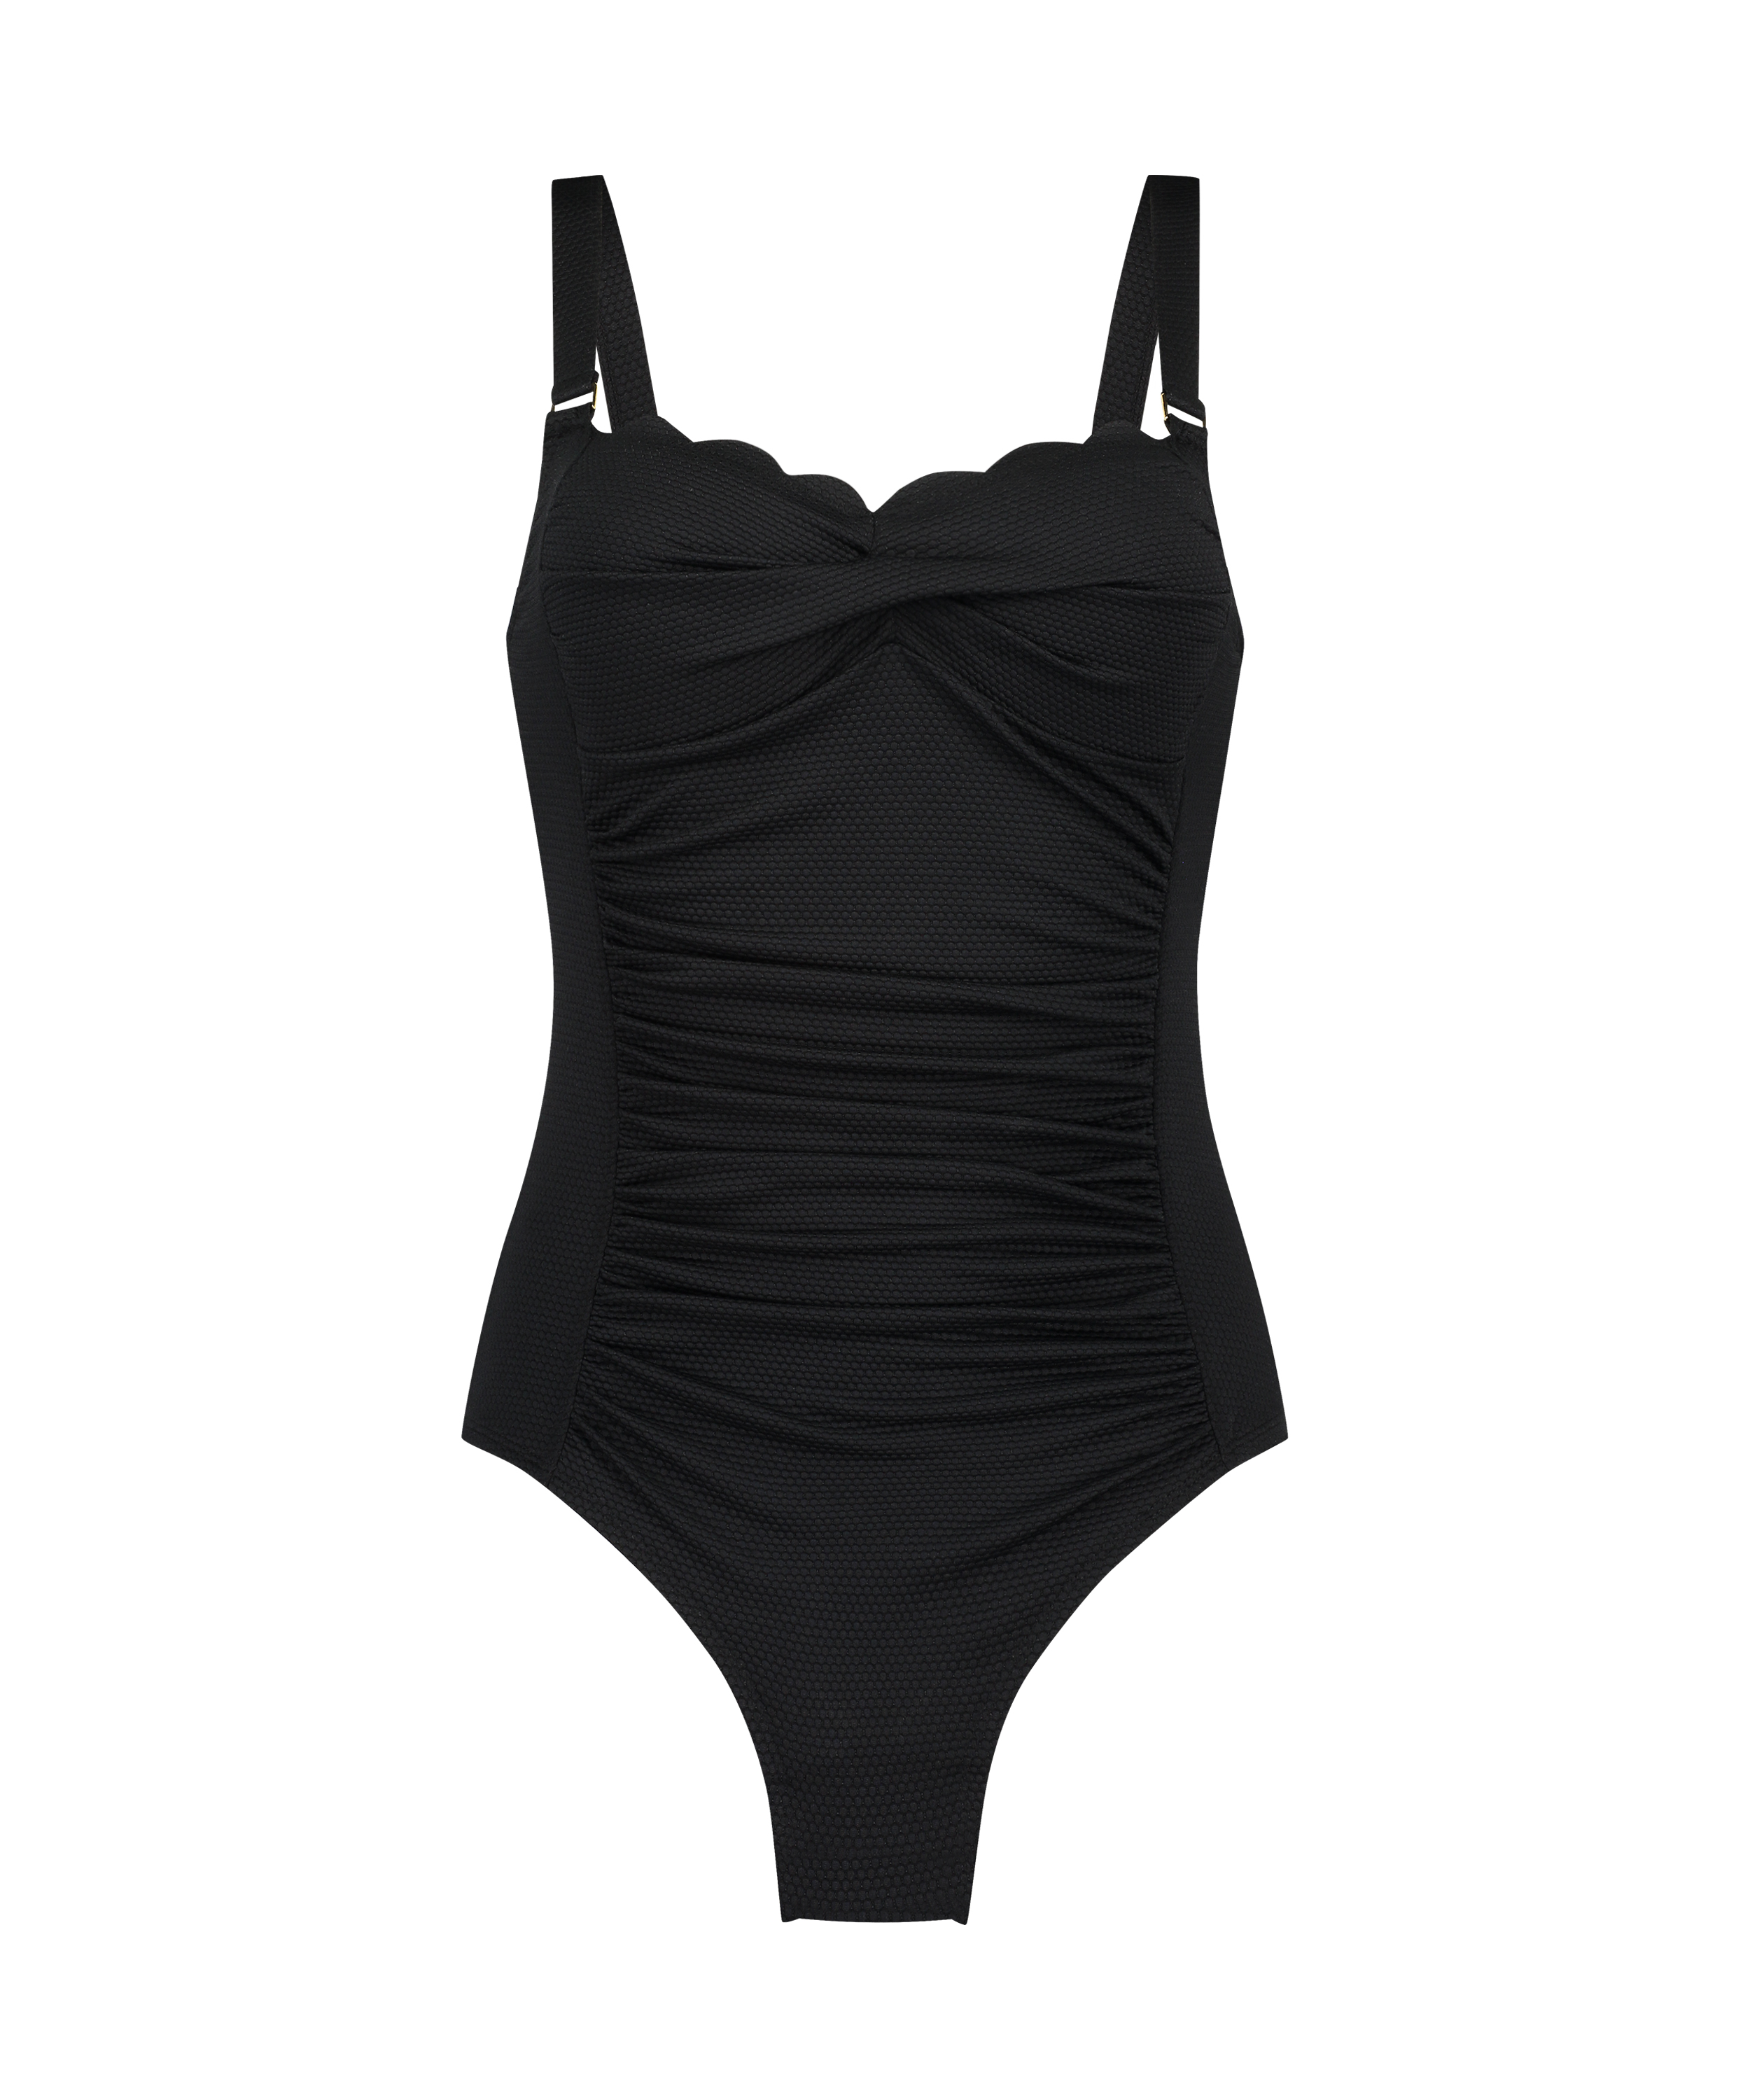 Scallop swimsuit for €54.99 - One-piece swimsuit - Hunkemöller